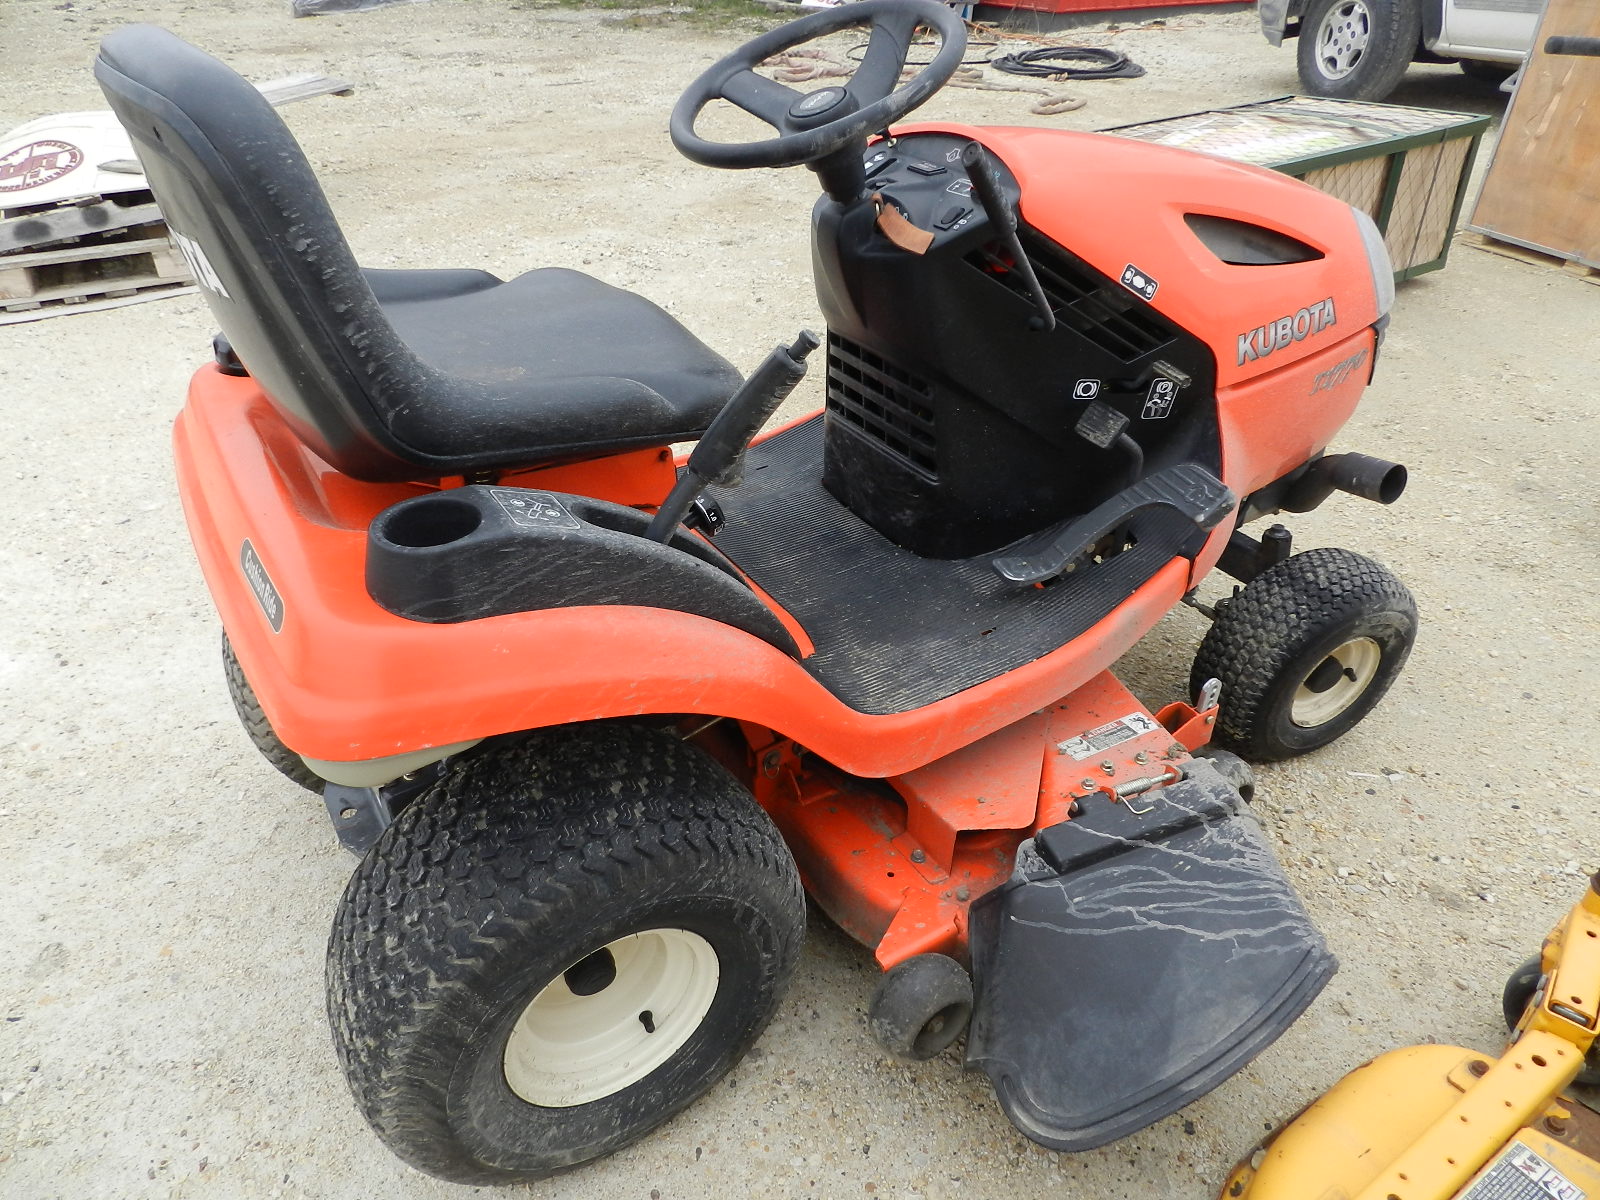 Kubota T1770 17HP Lawn Tractor, 348.9HRS | Penner Auction Sales Ltd.